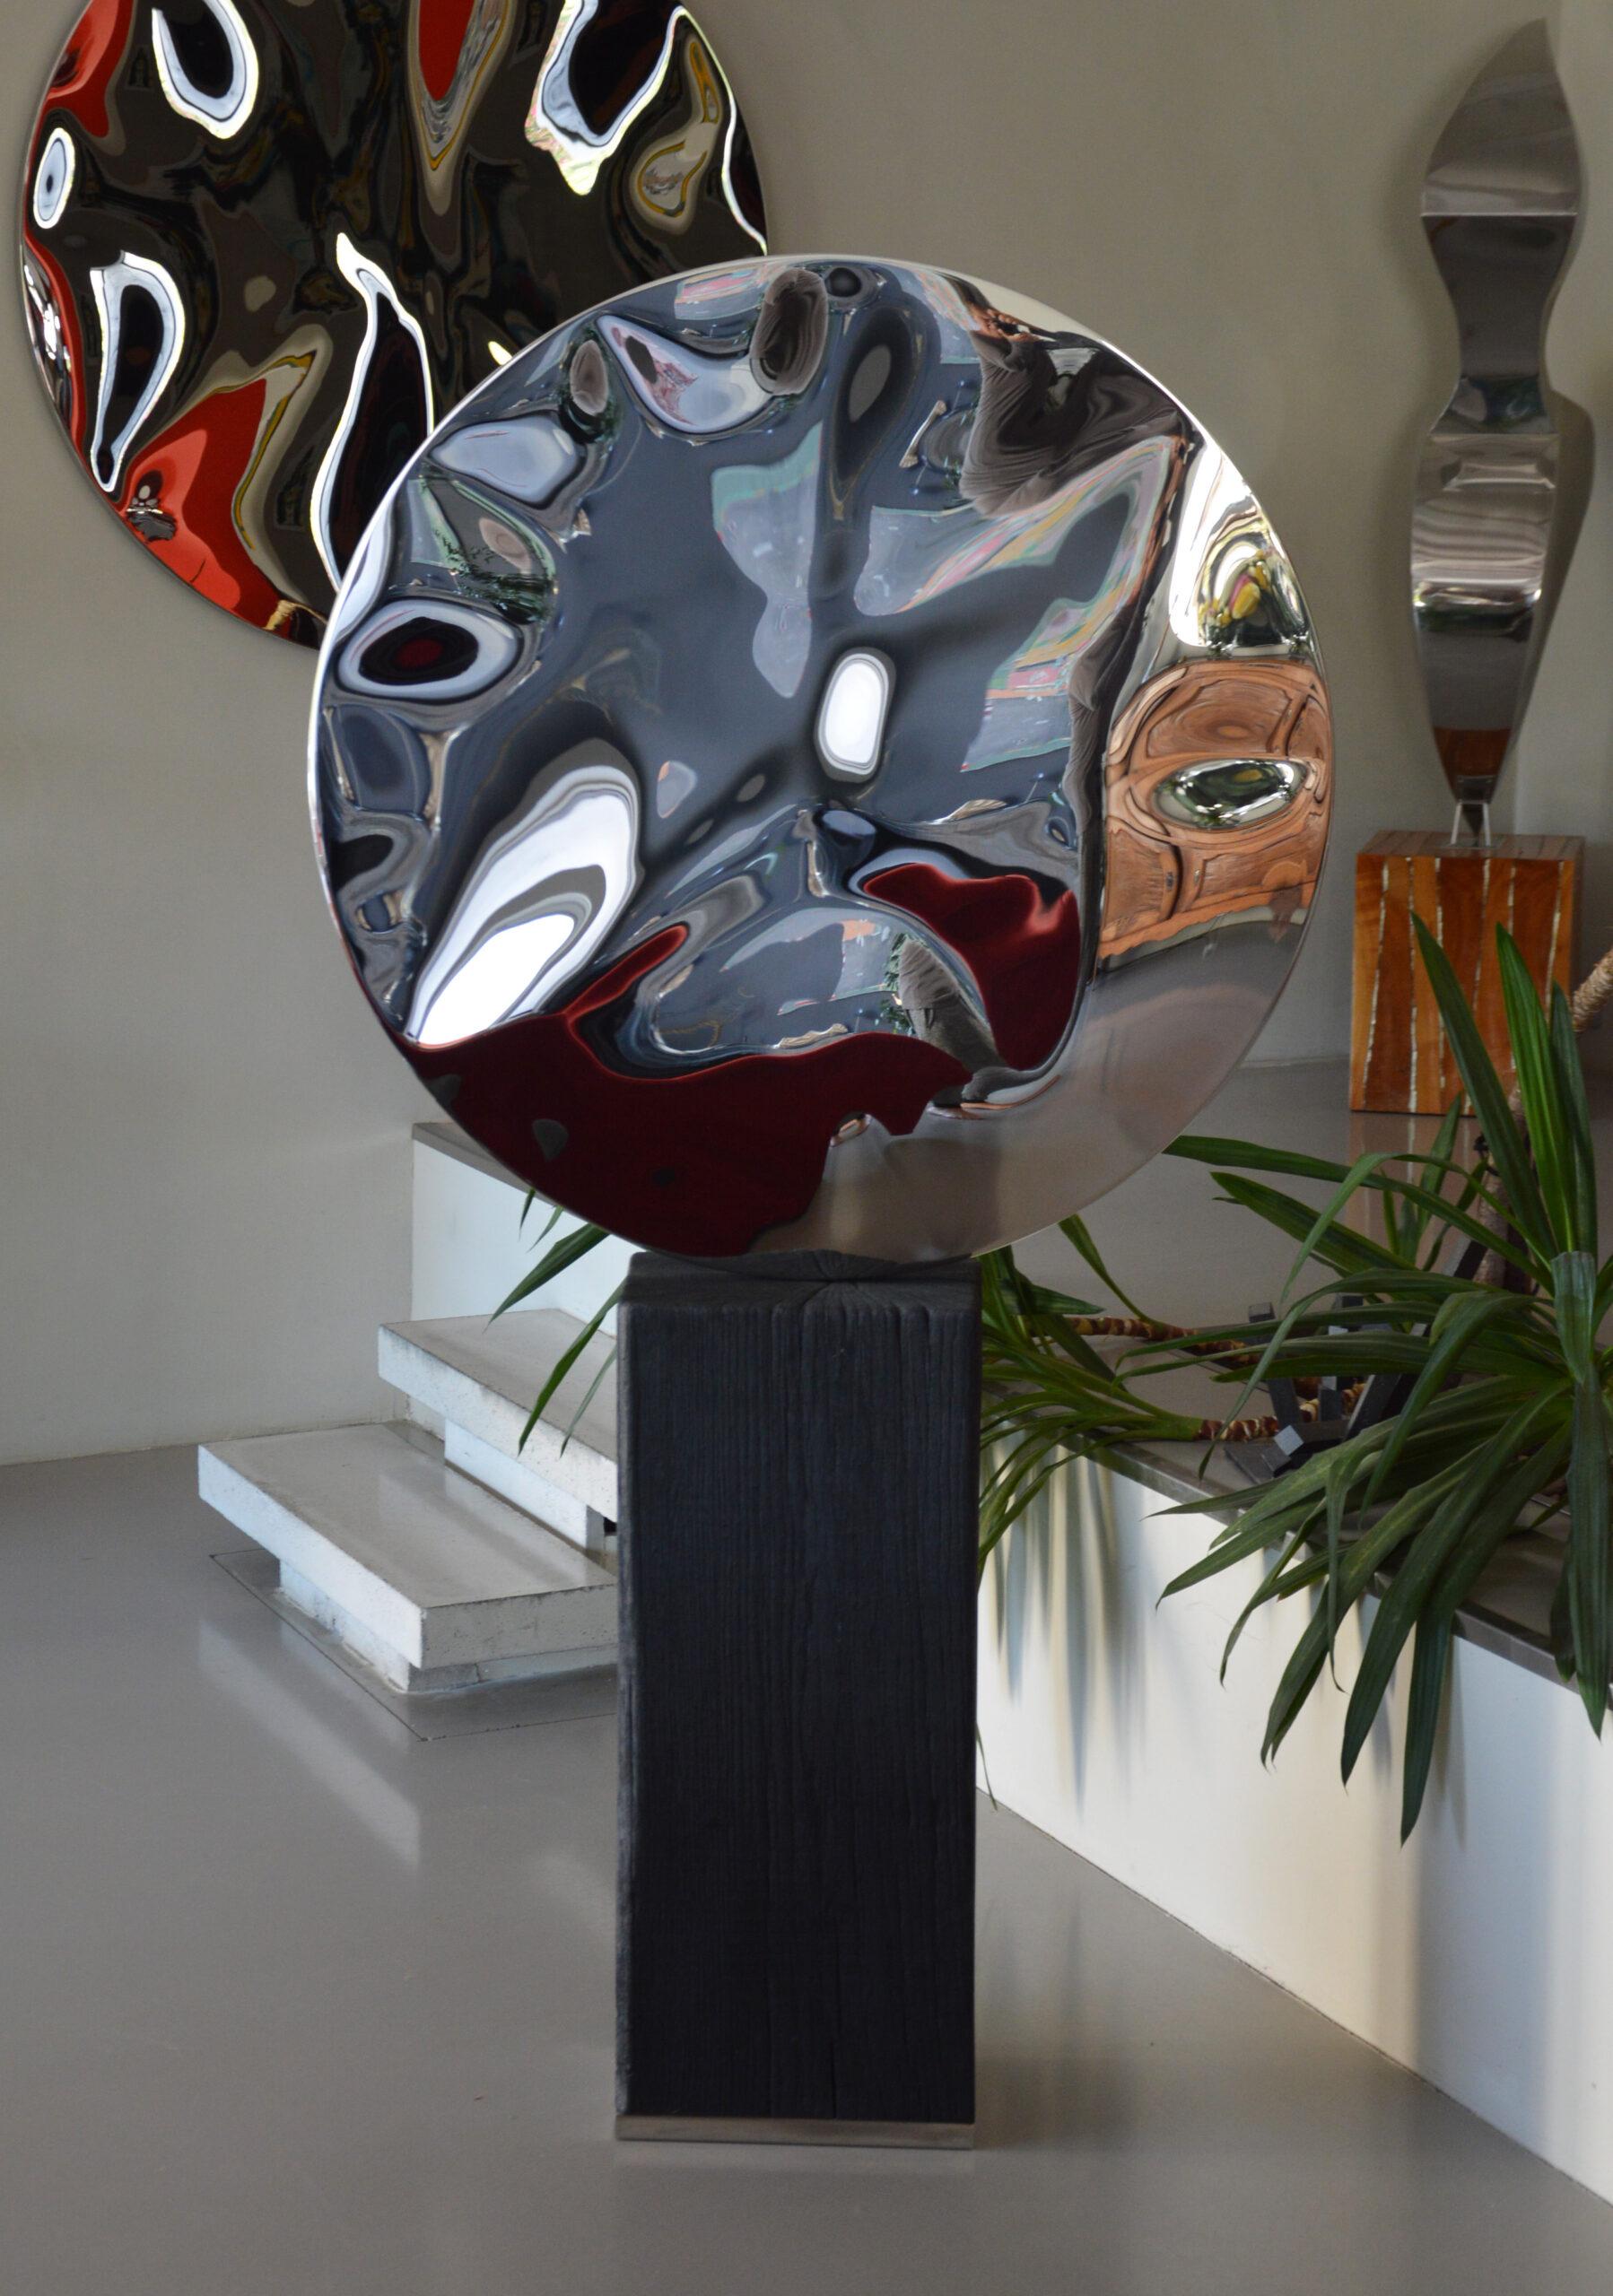 “Shattered” mirror II is a unique mirror-polished stainless steel sculpture and burnt oak or natural oak base by contemporary artist Franck K, dimensions are 173 × 97 × 31 cm (68.1 × 38.2 × 12.2 in). 
The sculpture is signed and comes with a